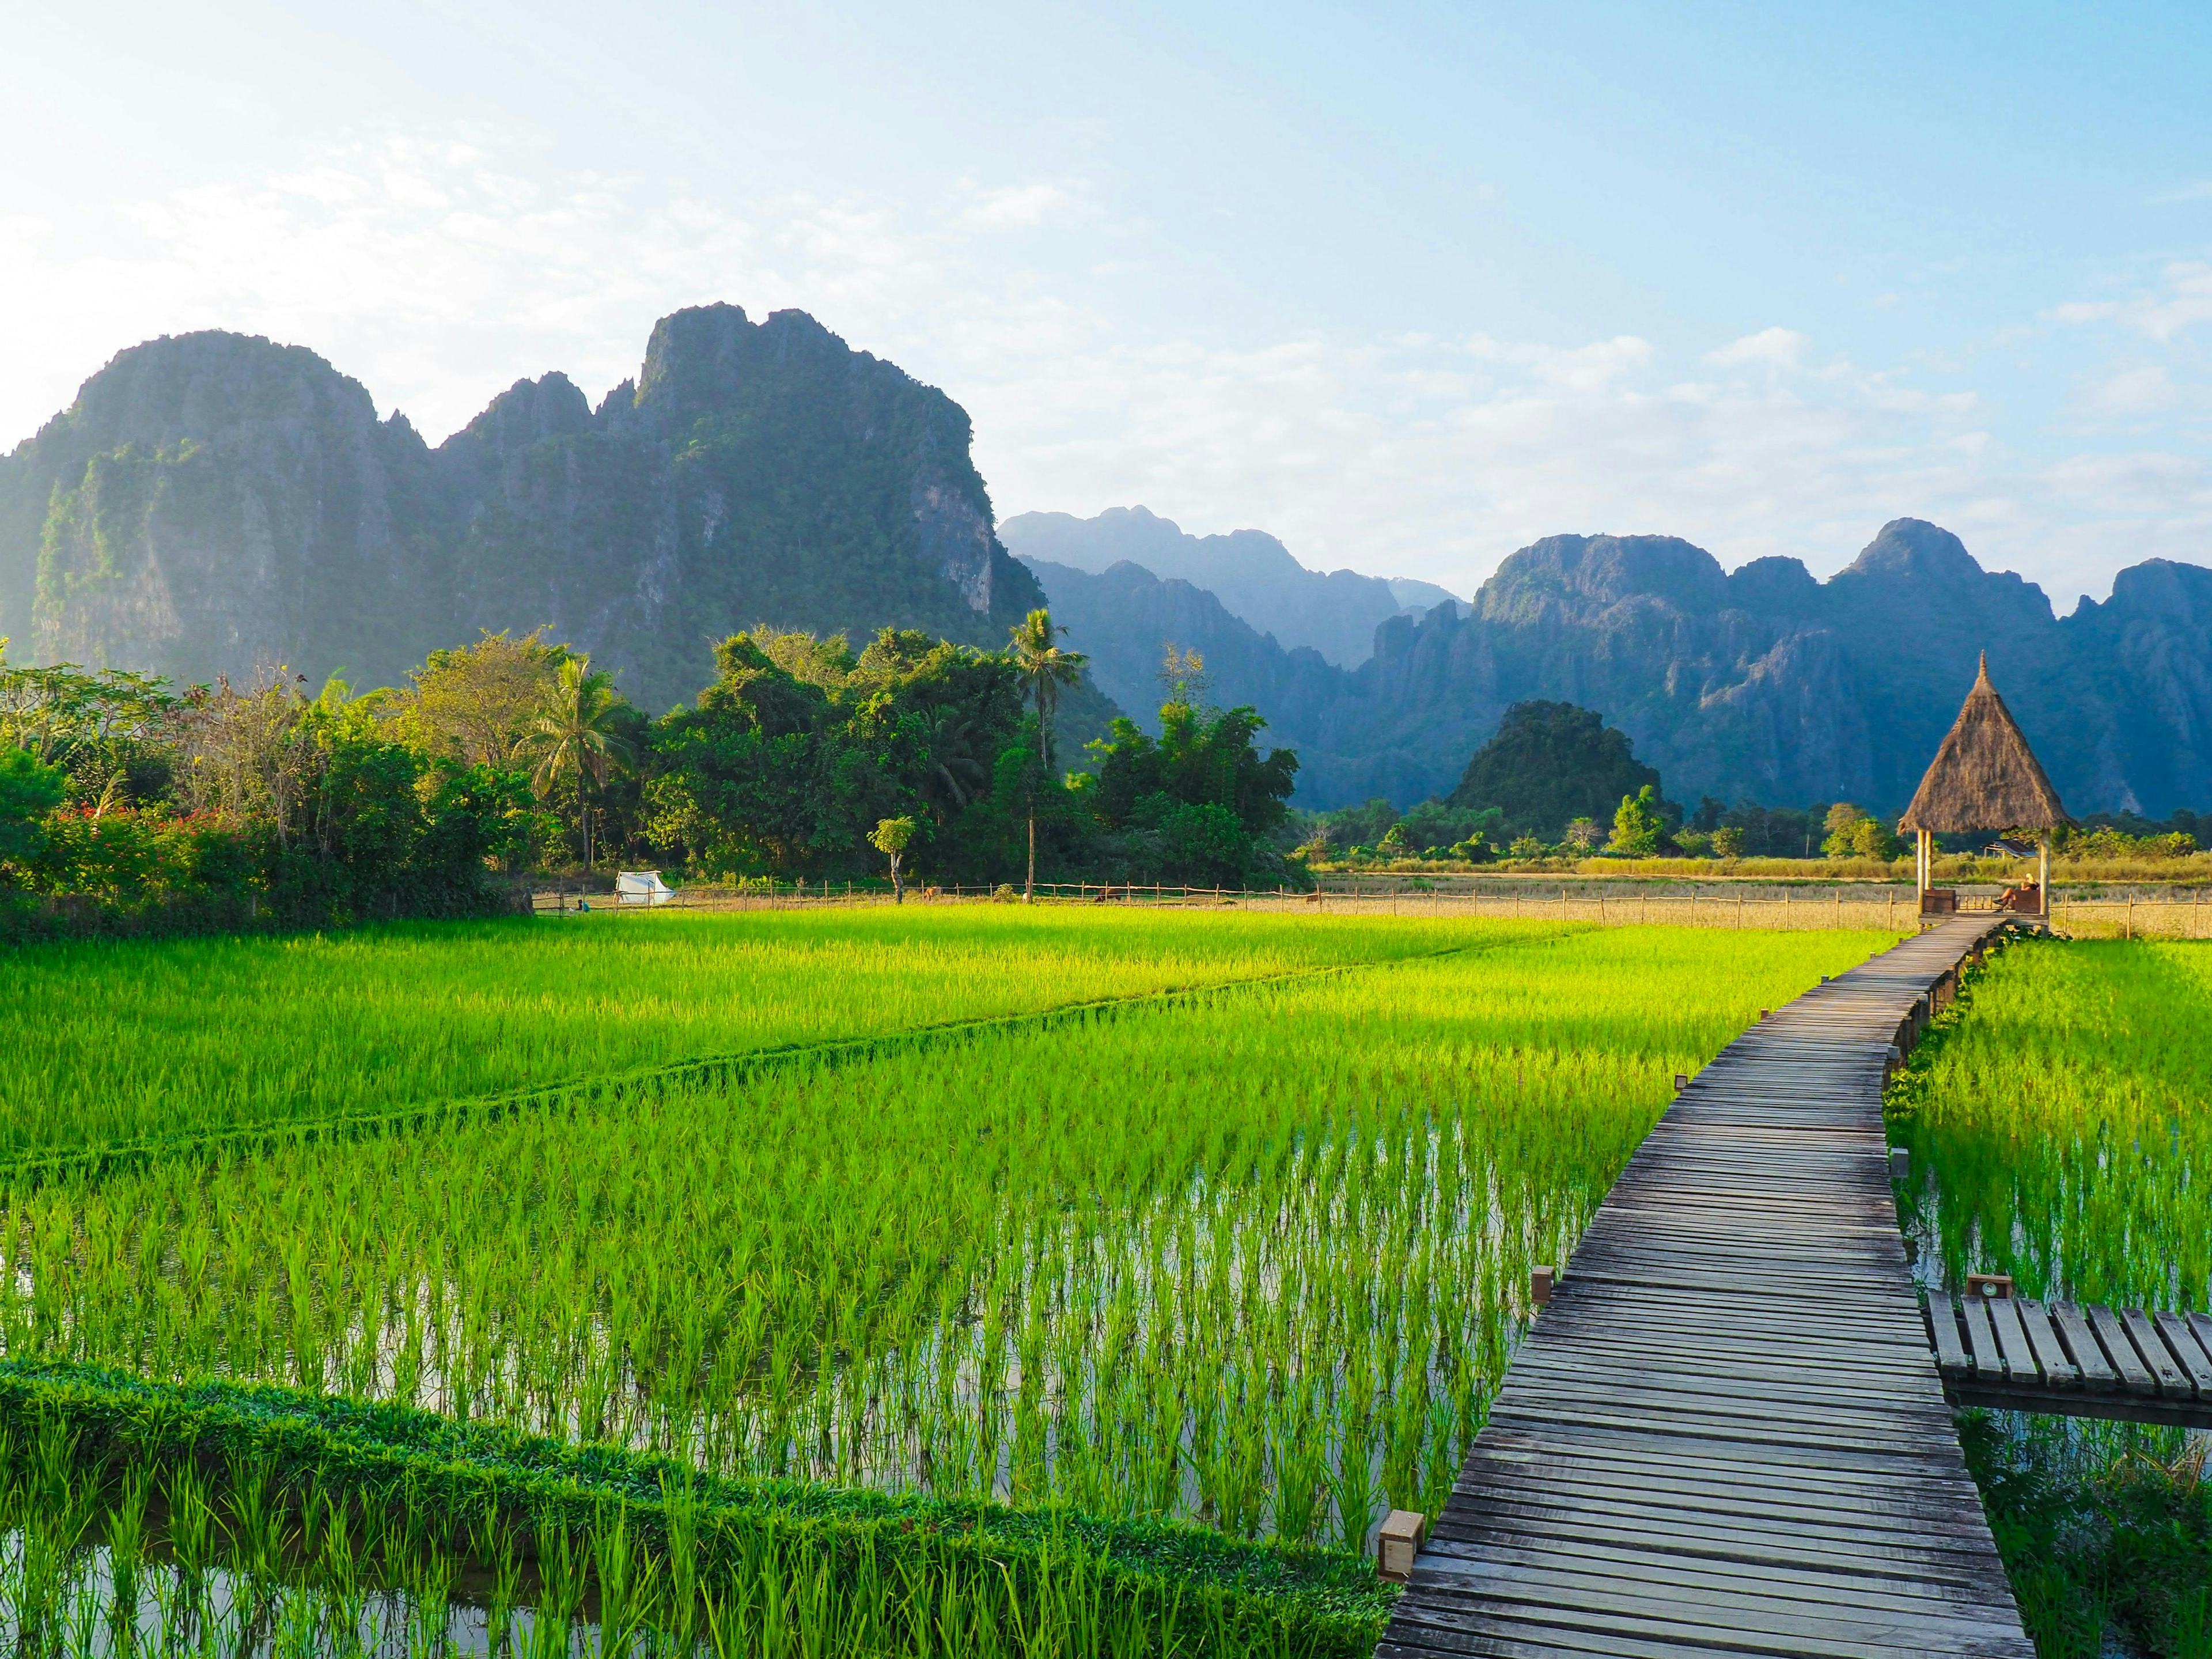 Green rice fields in Laos surrounded by mountain ranges 